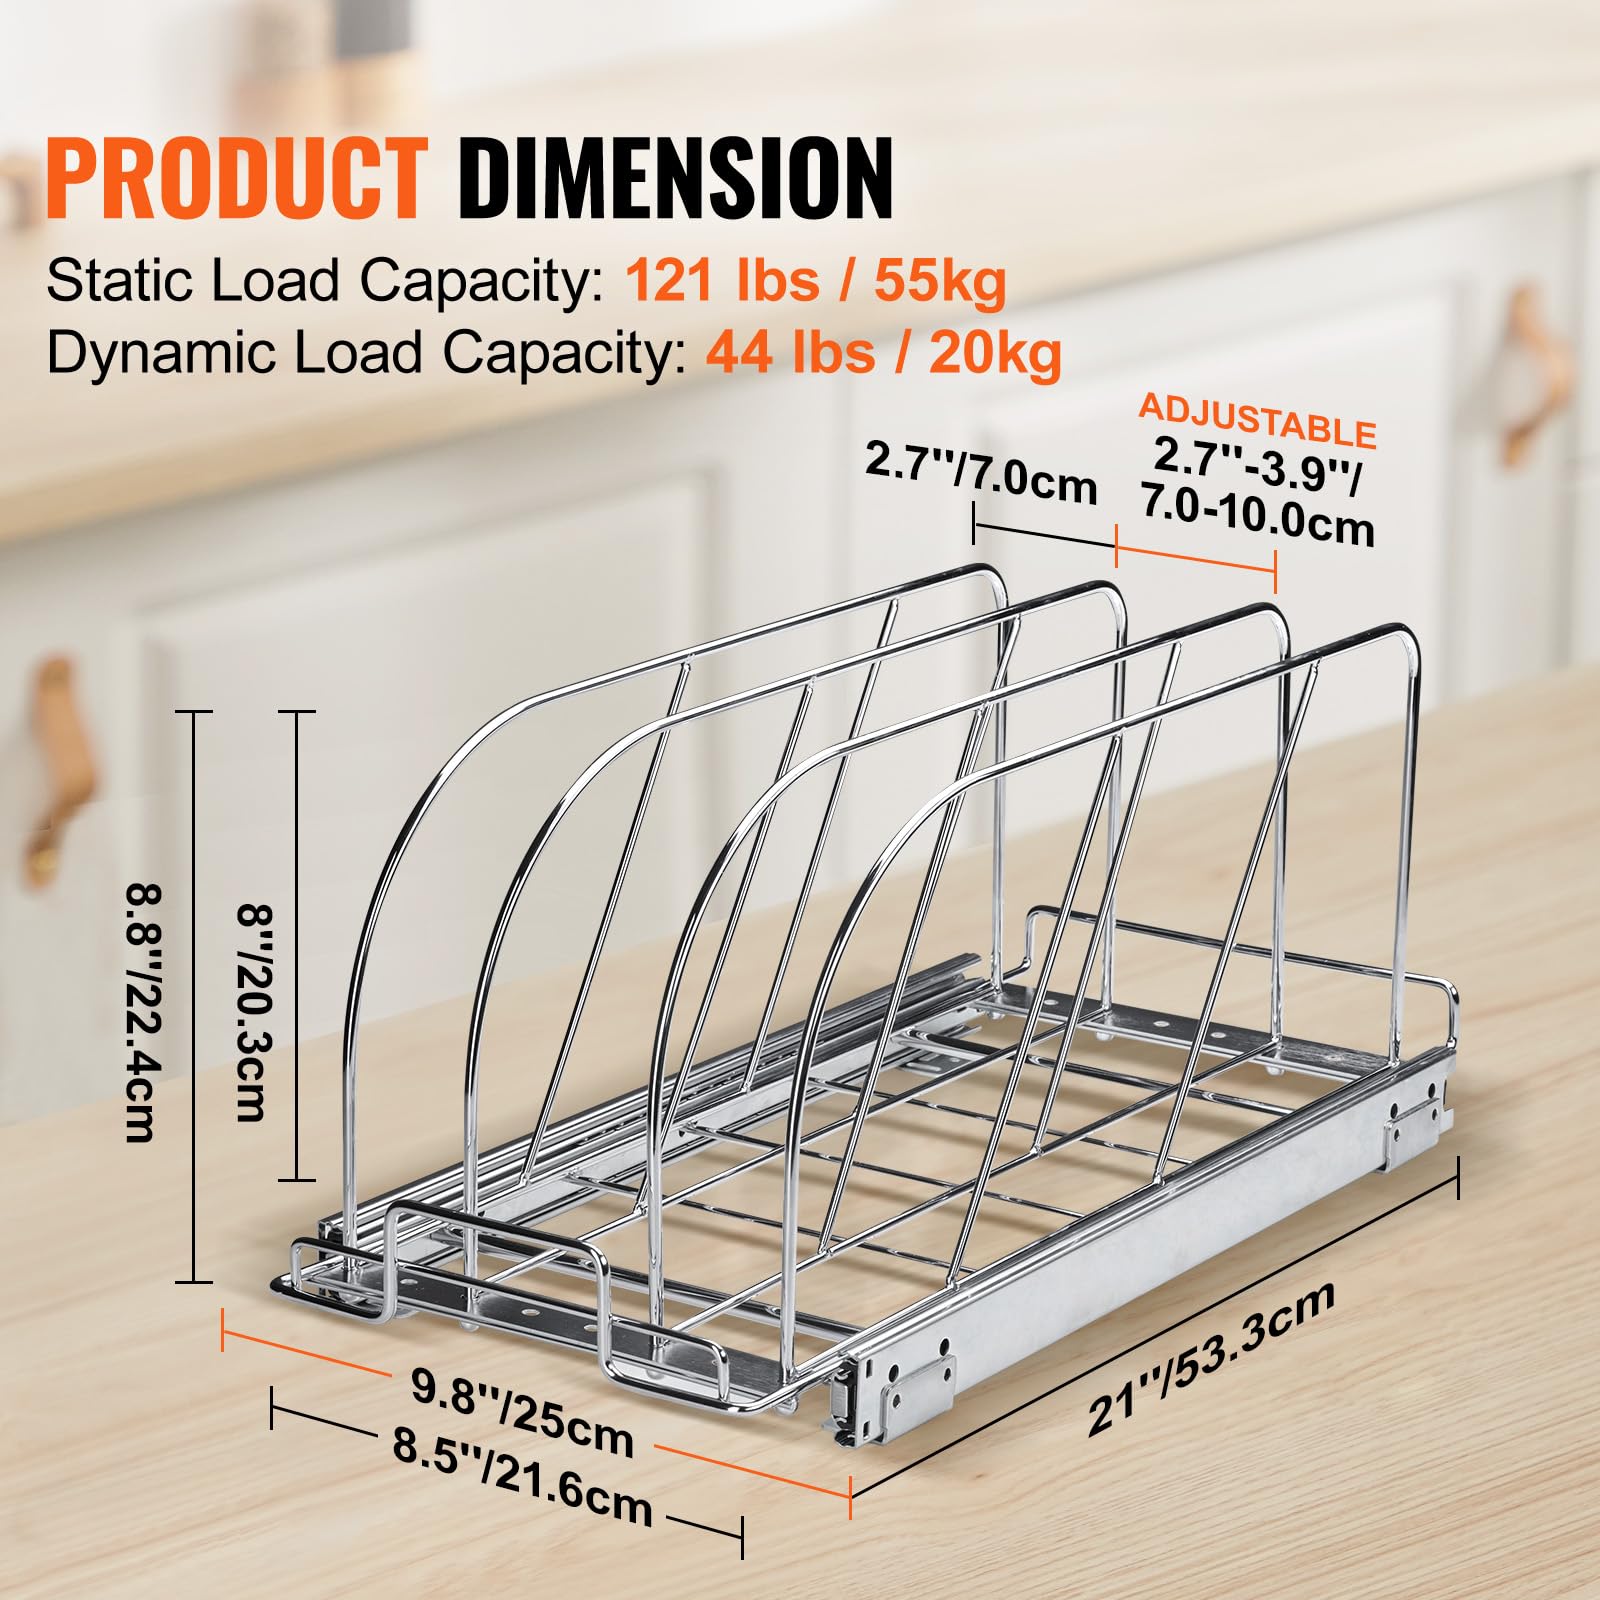 VEVOR Pan and Pot Rack, Expandable Pull Out Under Cabinet Organizer, Cookie Baking Pans tray Organization, Adjustable Wire Dividers, Steel Lid for Kitchen Cabinet & Pantry, 8.5"W